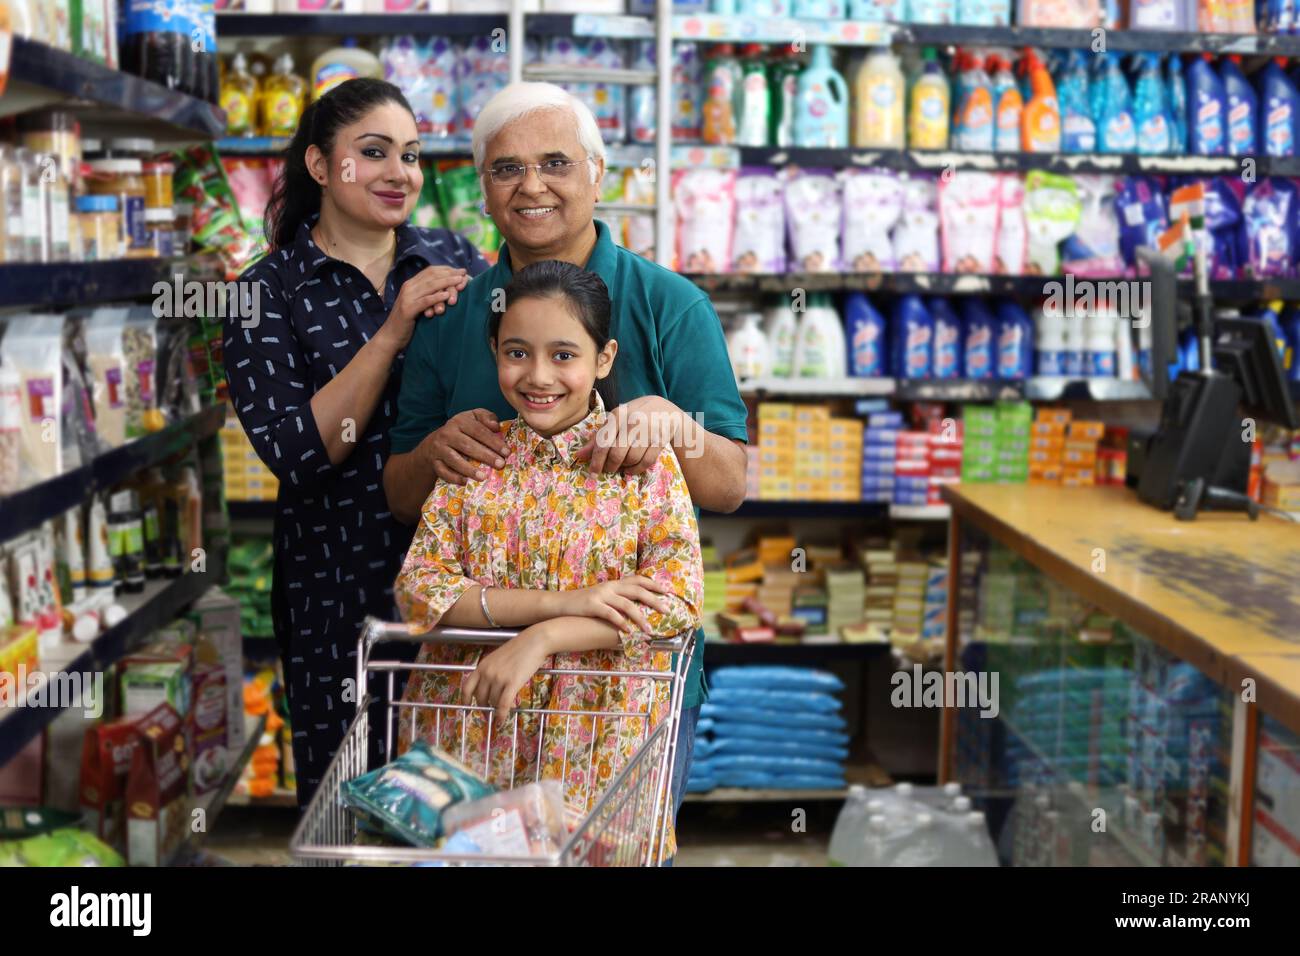 Happy Grandpa and Grand Daughters enjoying purchasing in grocery store. Buying grocery for home in hypermarket. Grand daughter and daughter in law. Stock Photo